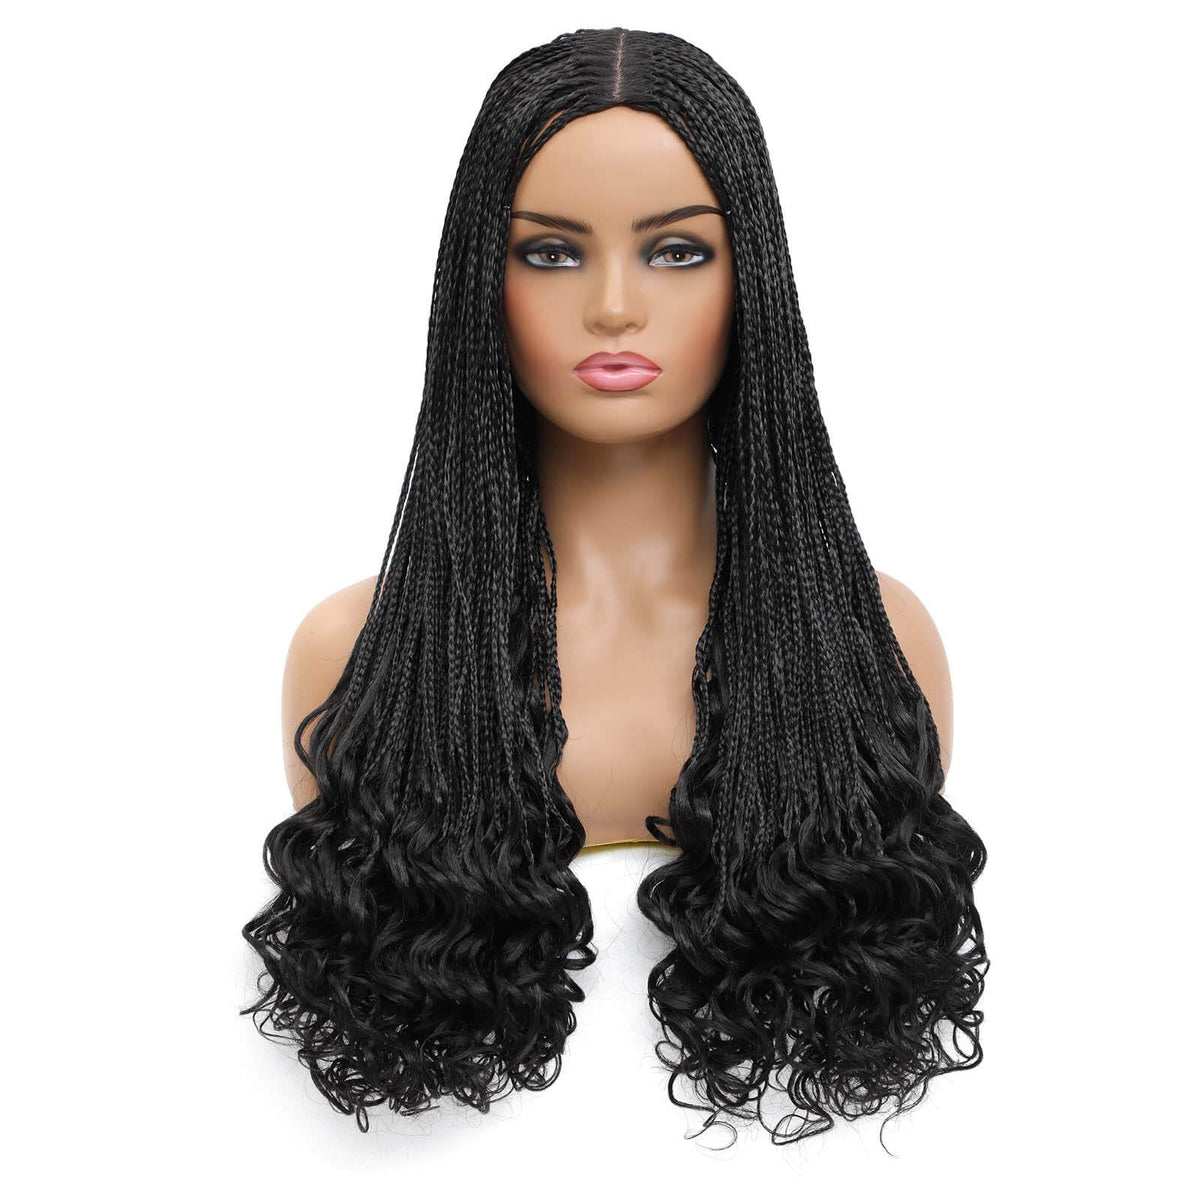 Box Braided Wig with Goddess Curly Ends Black Color Product Show